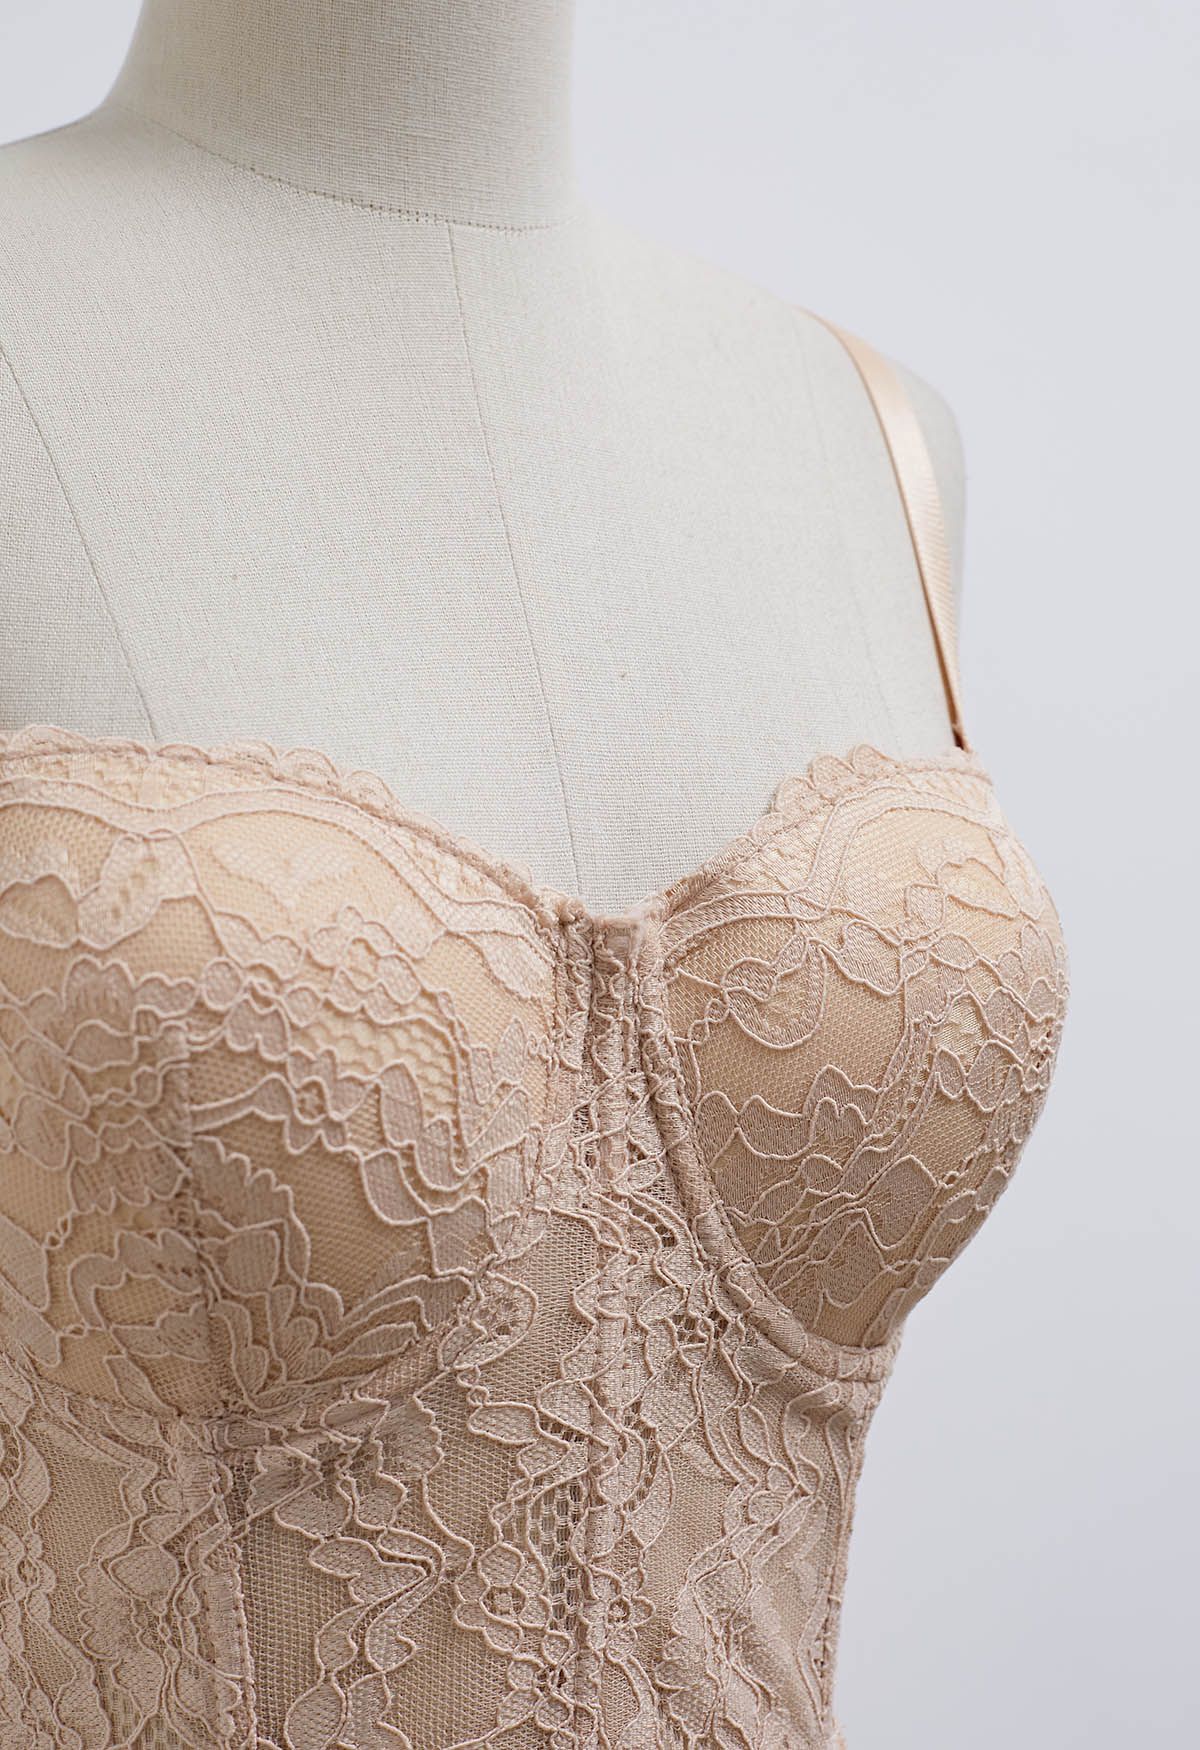 Floral Lace Bustier Crop Top in Apricot